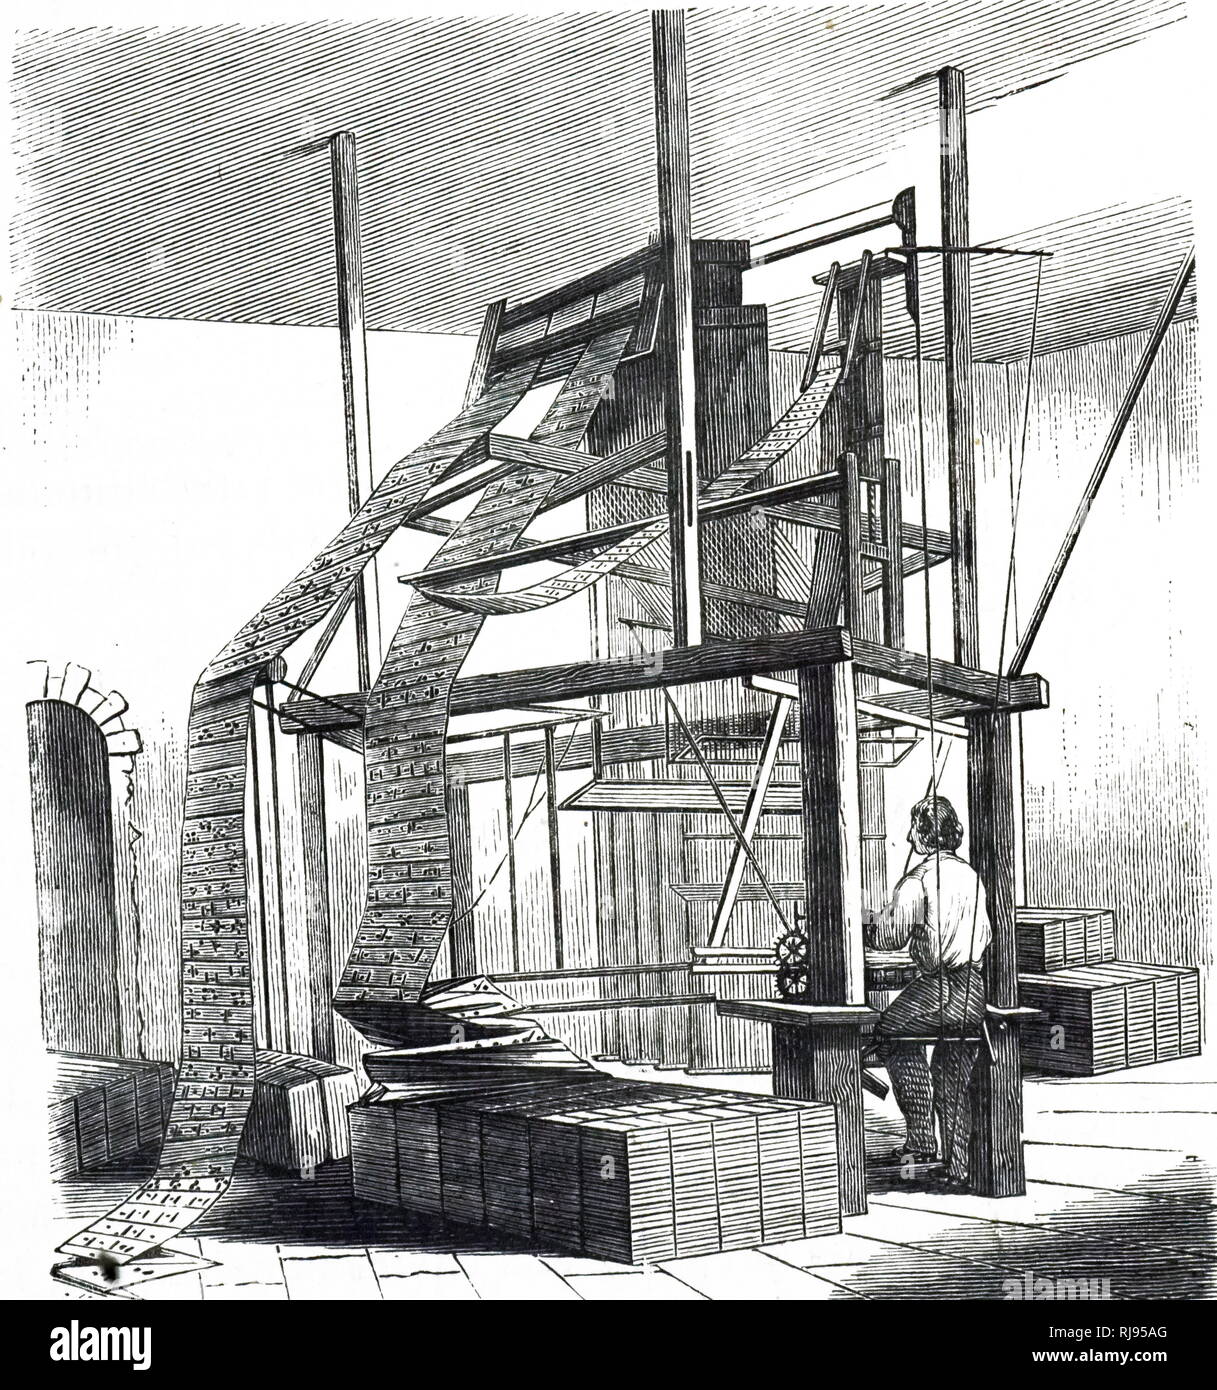 An engraving depicting a Jacquard Loom. The jacquard punched cards can be seen above the weaver's head. Dated 19th century Stock Photo